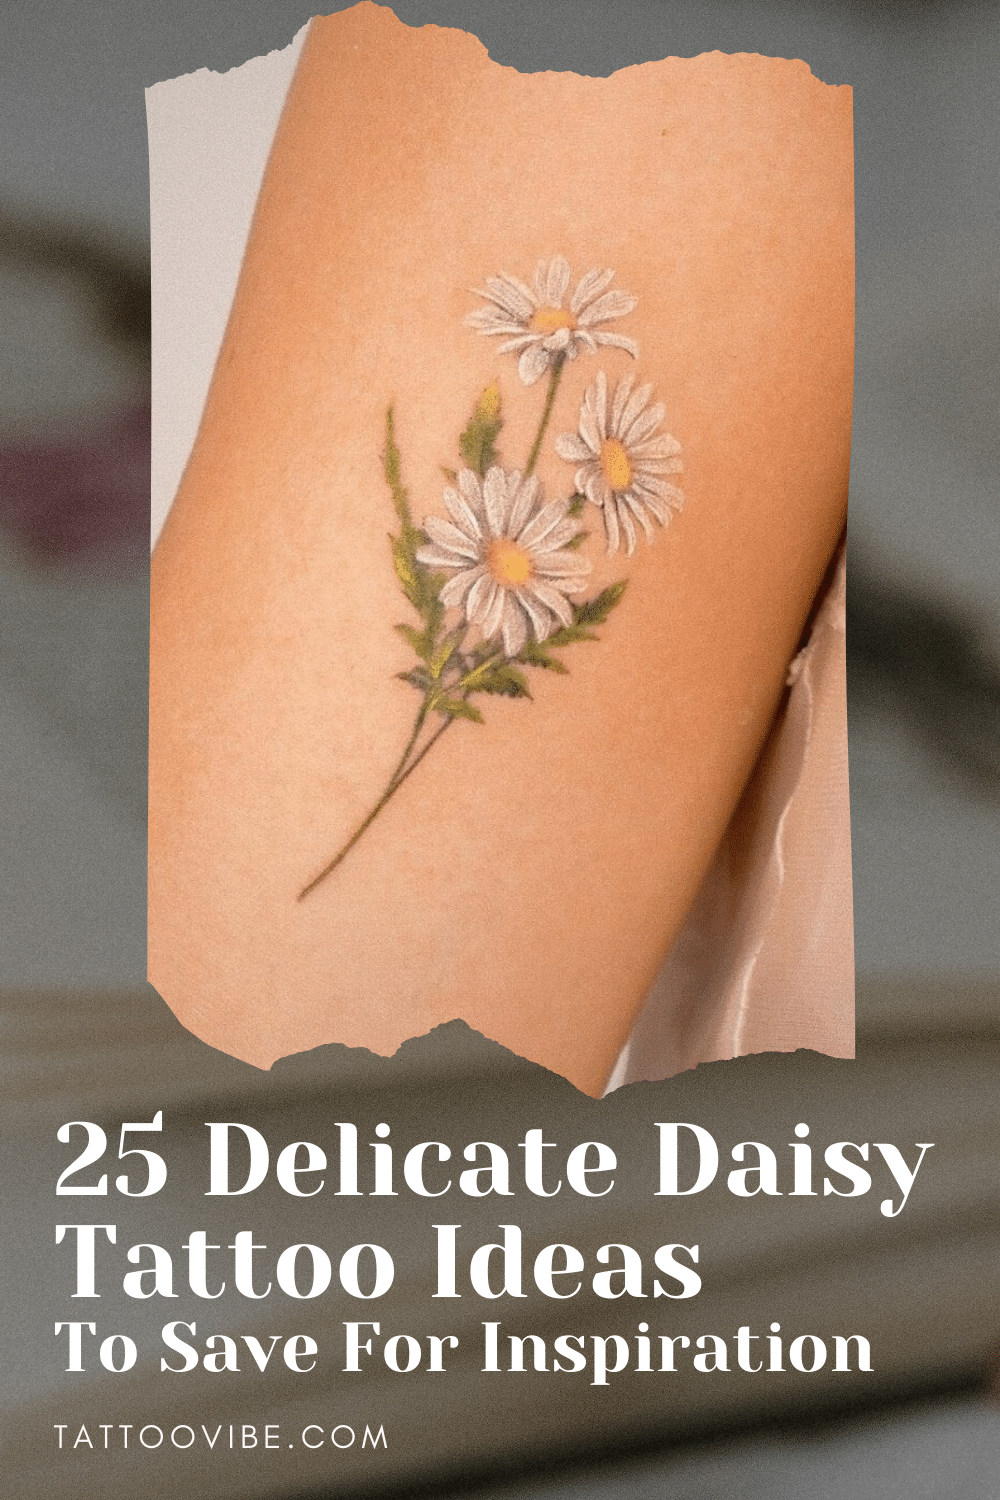 25 Delicate Daisy Tattoo Ideas To Save For Inspiration